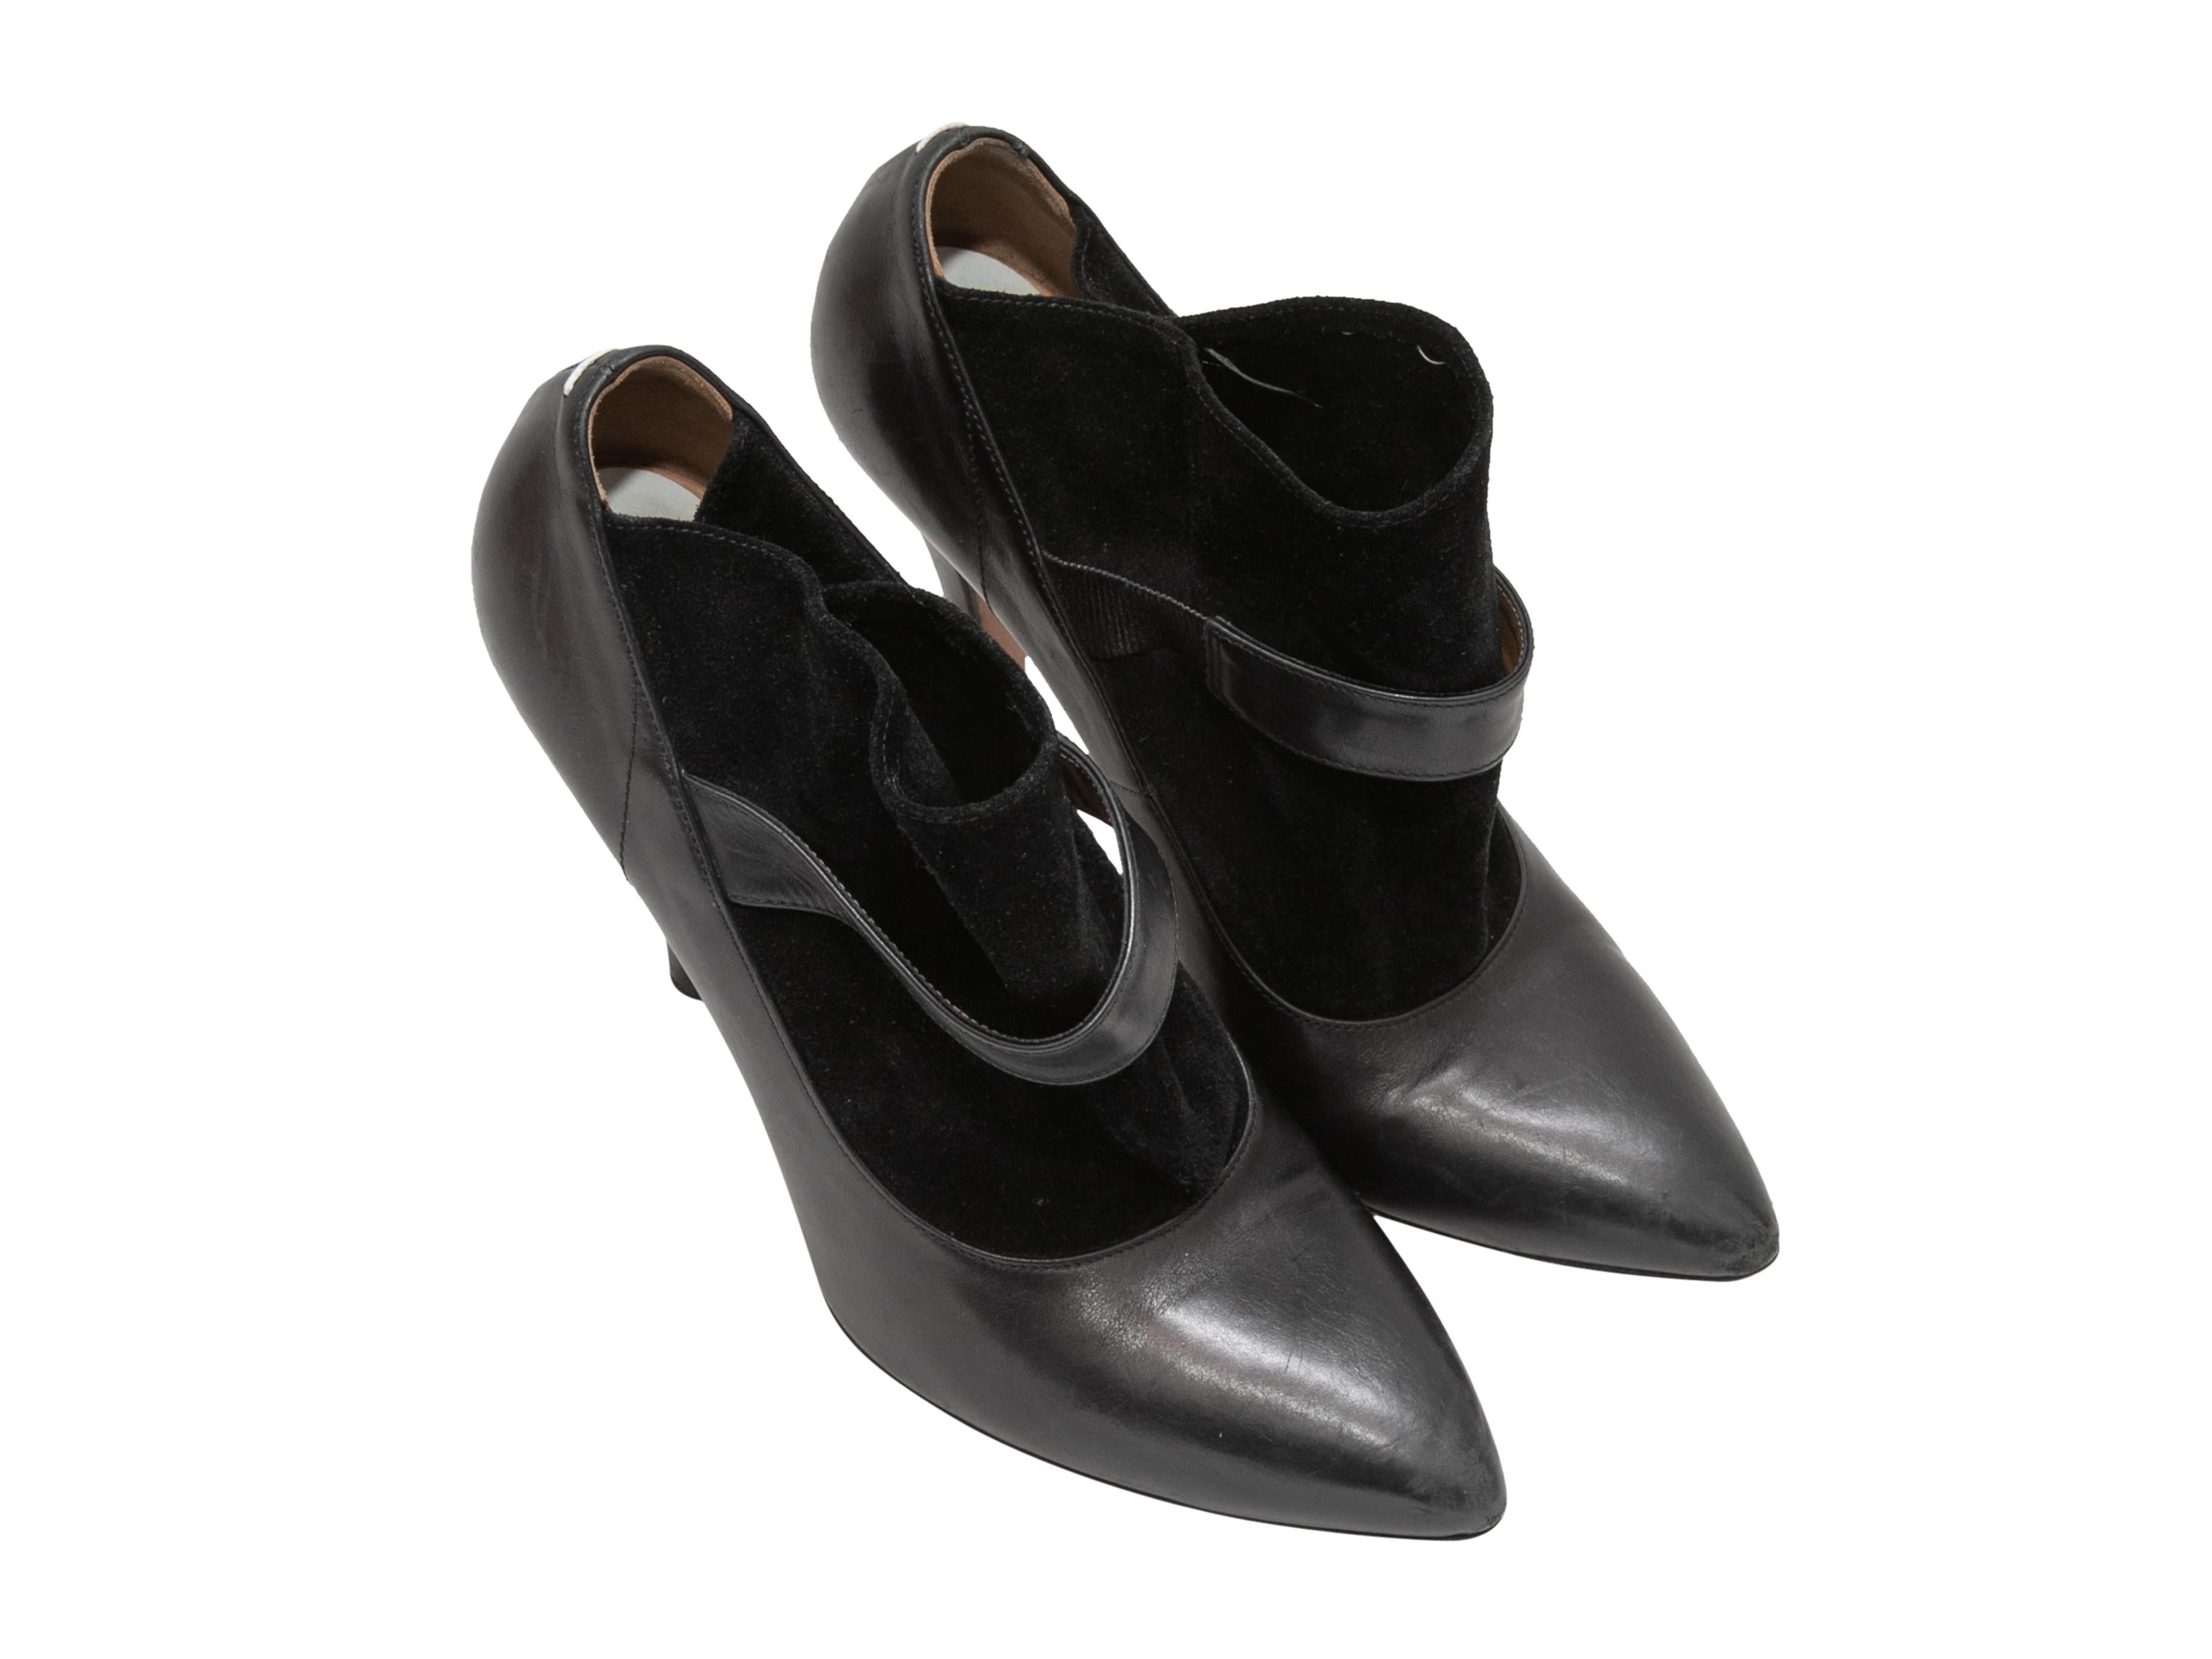 Black leather and suede pointed-toe booties by Maison Margiela Replica. 4.25